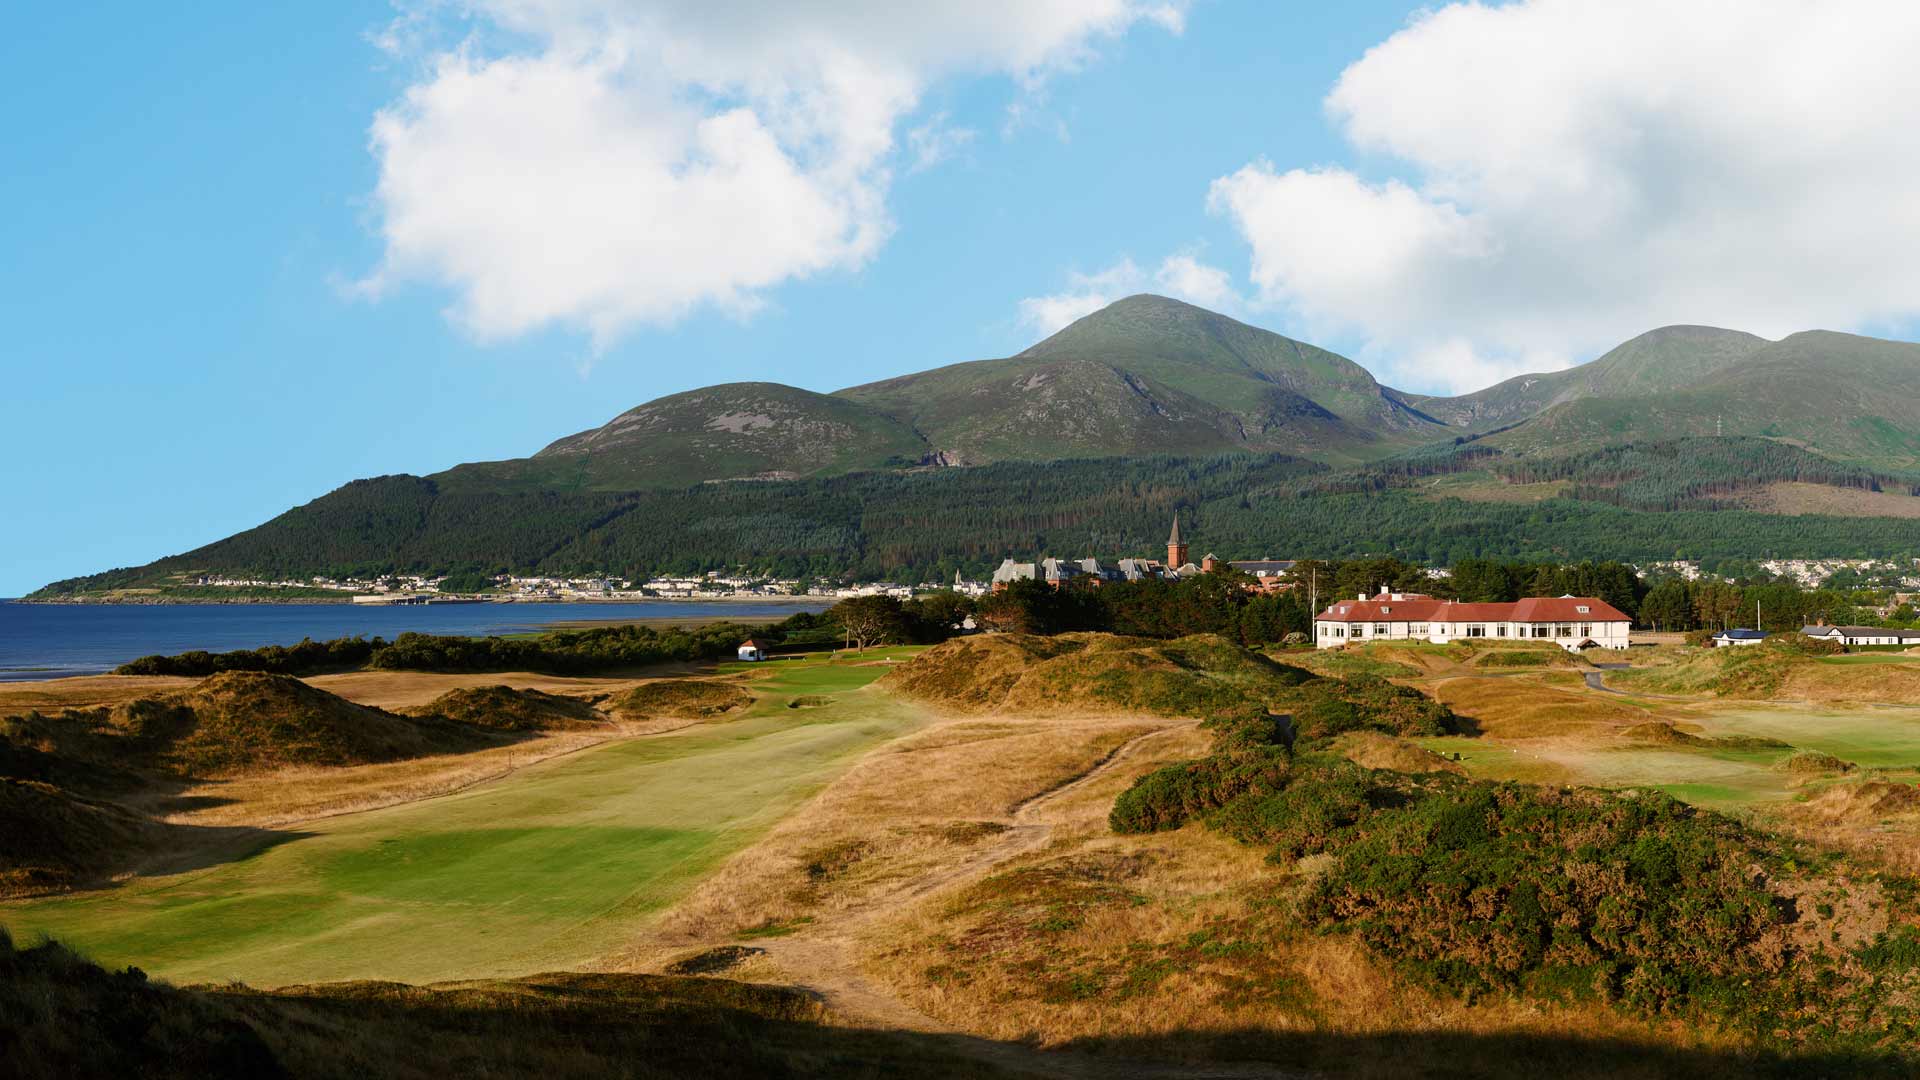 leisure and tourism of slieve donard